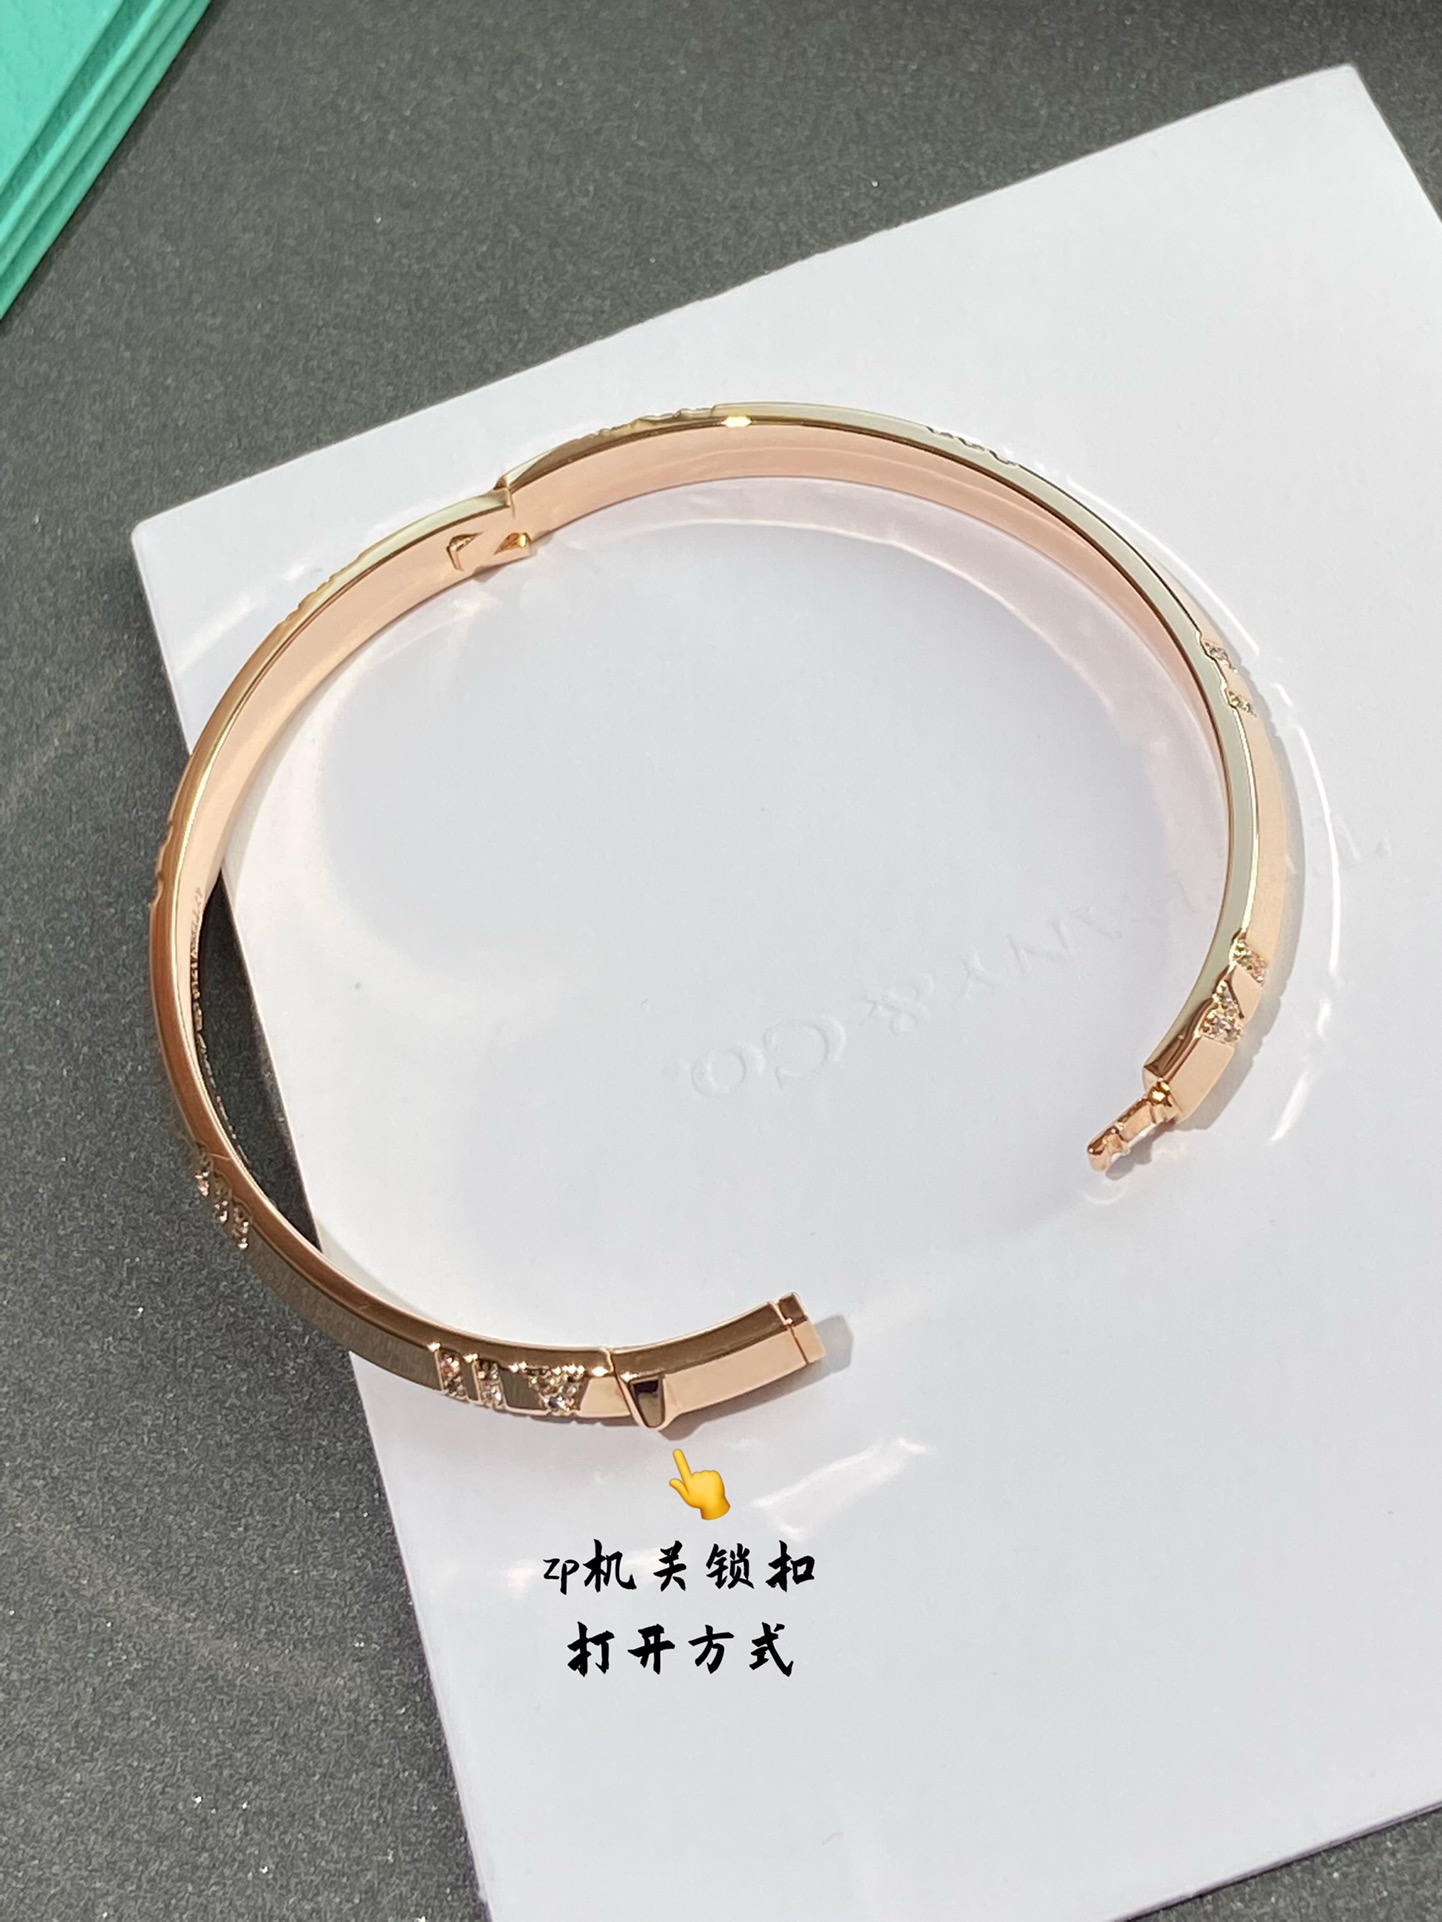 Atlas® X Closed Wide Hinged Bangle in Rose Gold with Diamonds